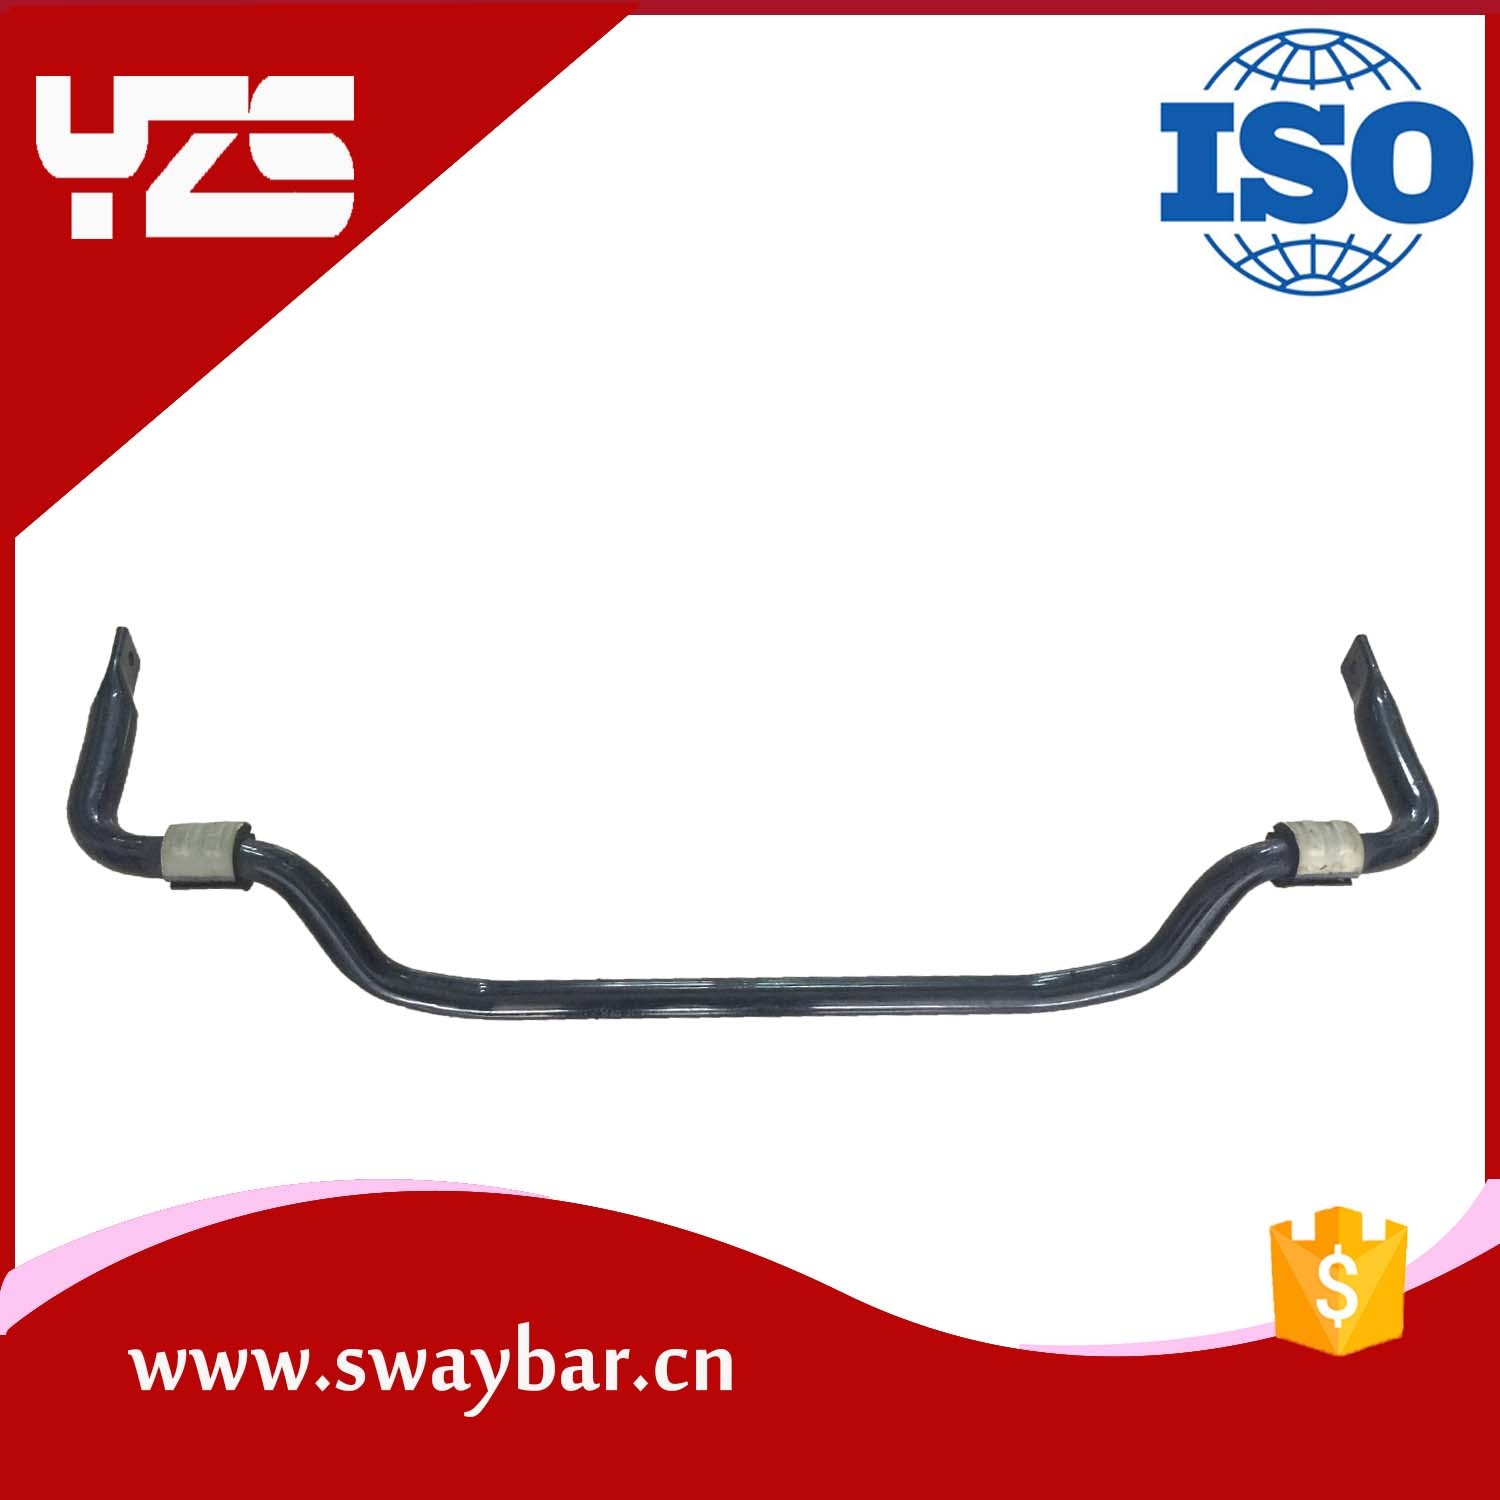 What are the symptoms of a bad sway bar?